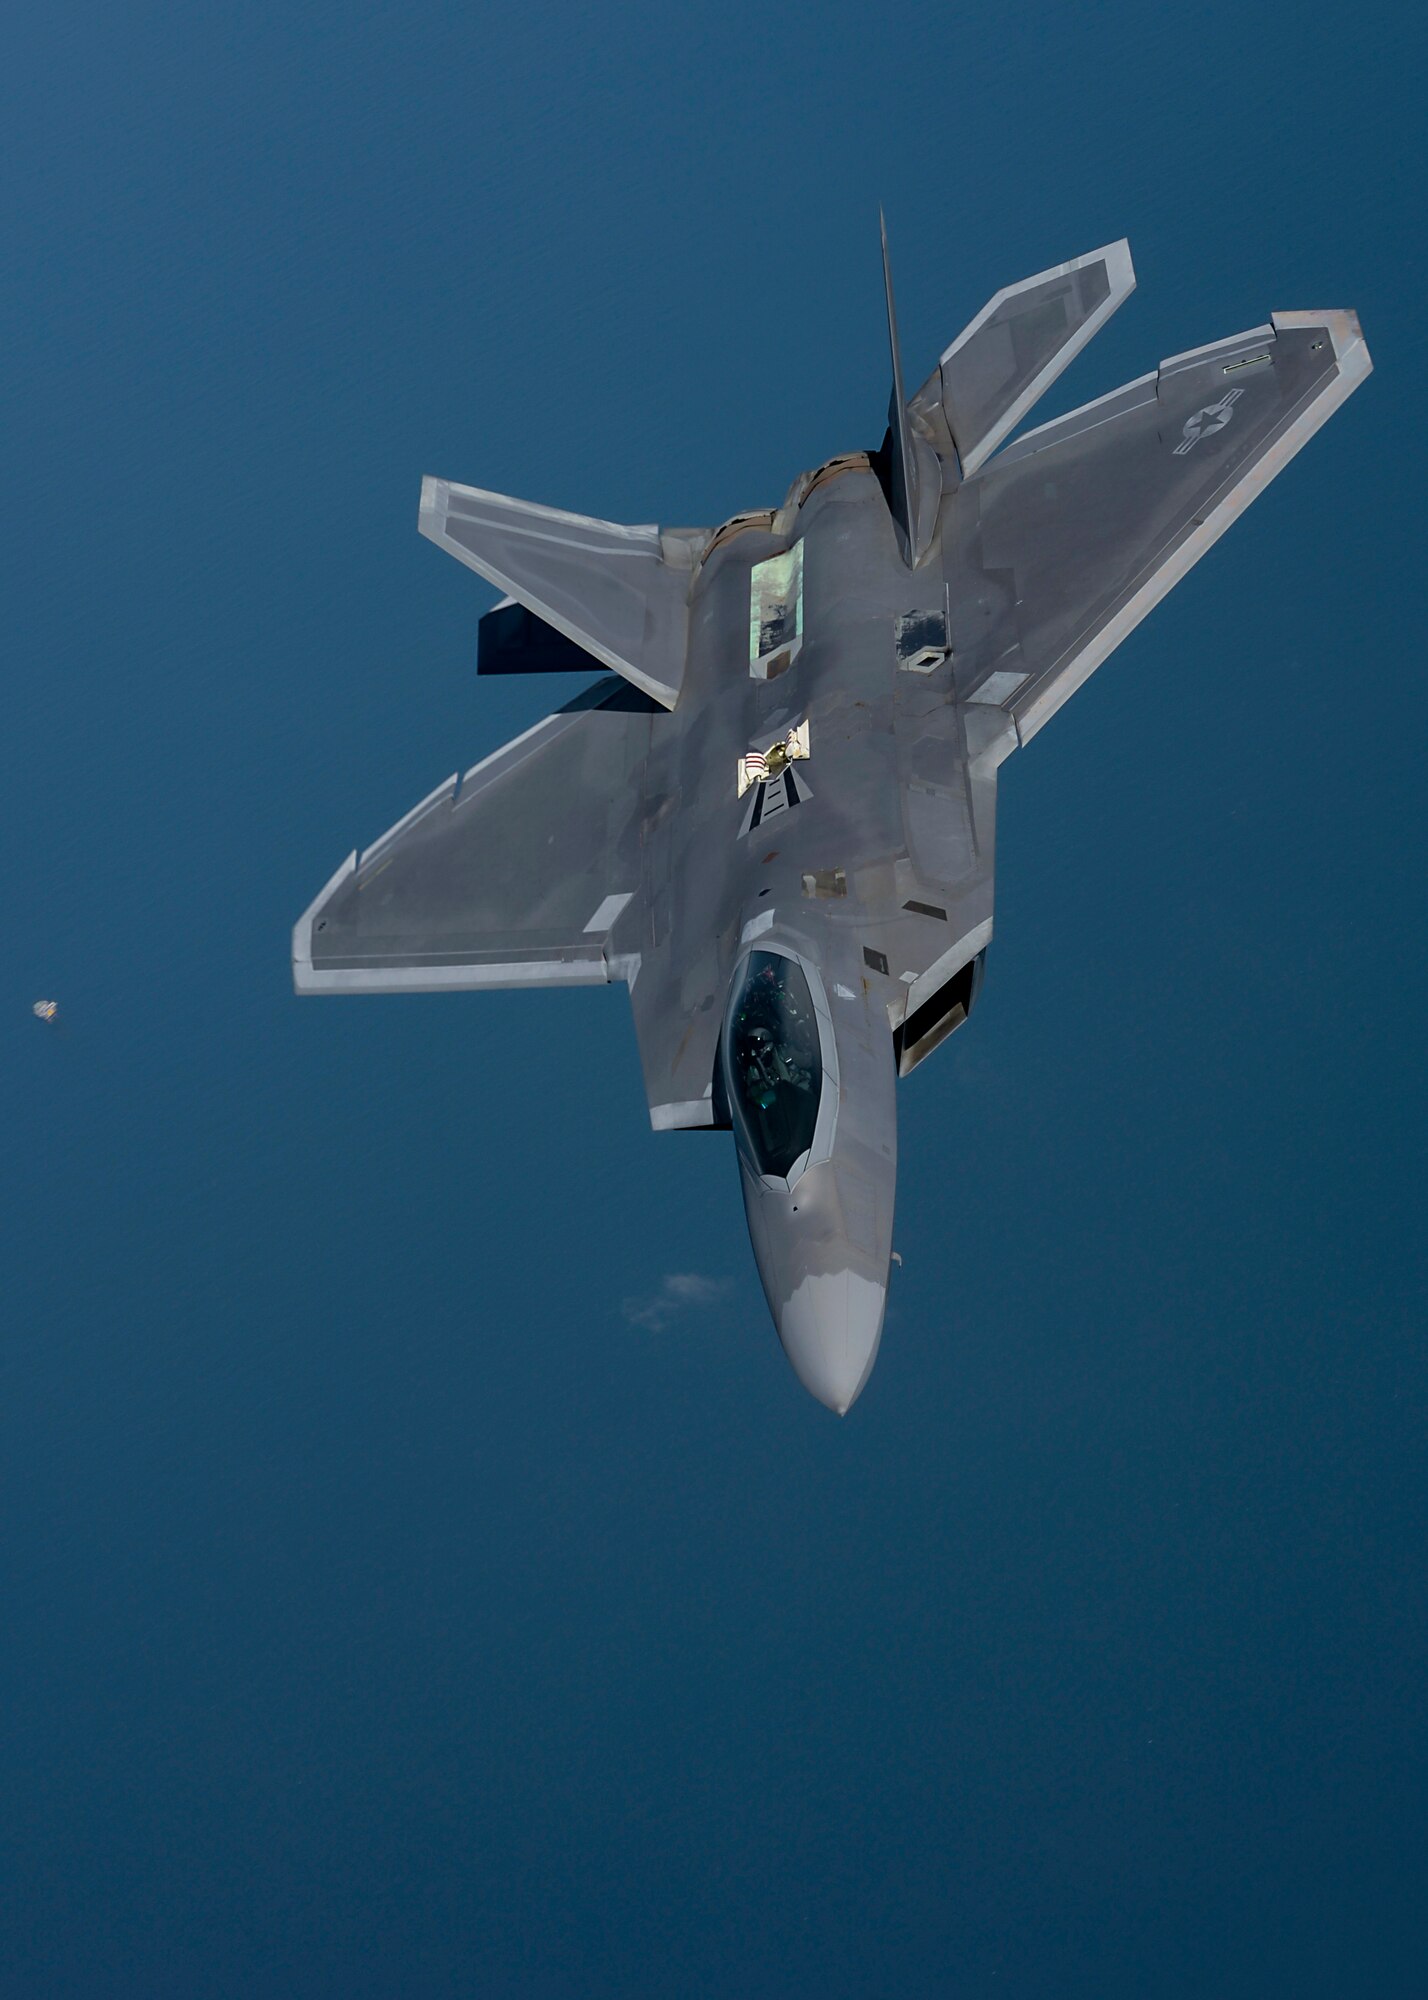 An F-22 Raptor assigned to the 95th Fighter Squadron at Tyndall Air Force Base, Fla., flies over the Norfolk Sea April 19, 2016, while participating in Exercise Iron Hand. The fifth generation, multi-role fighter aircraft participated to maximize training opportunities, affirm enduring commitments to NATO allies, and deter any actions that destabilize regional security. (U.S. Air Force photo by Senior Airman Victoria H. Taylor/Released)